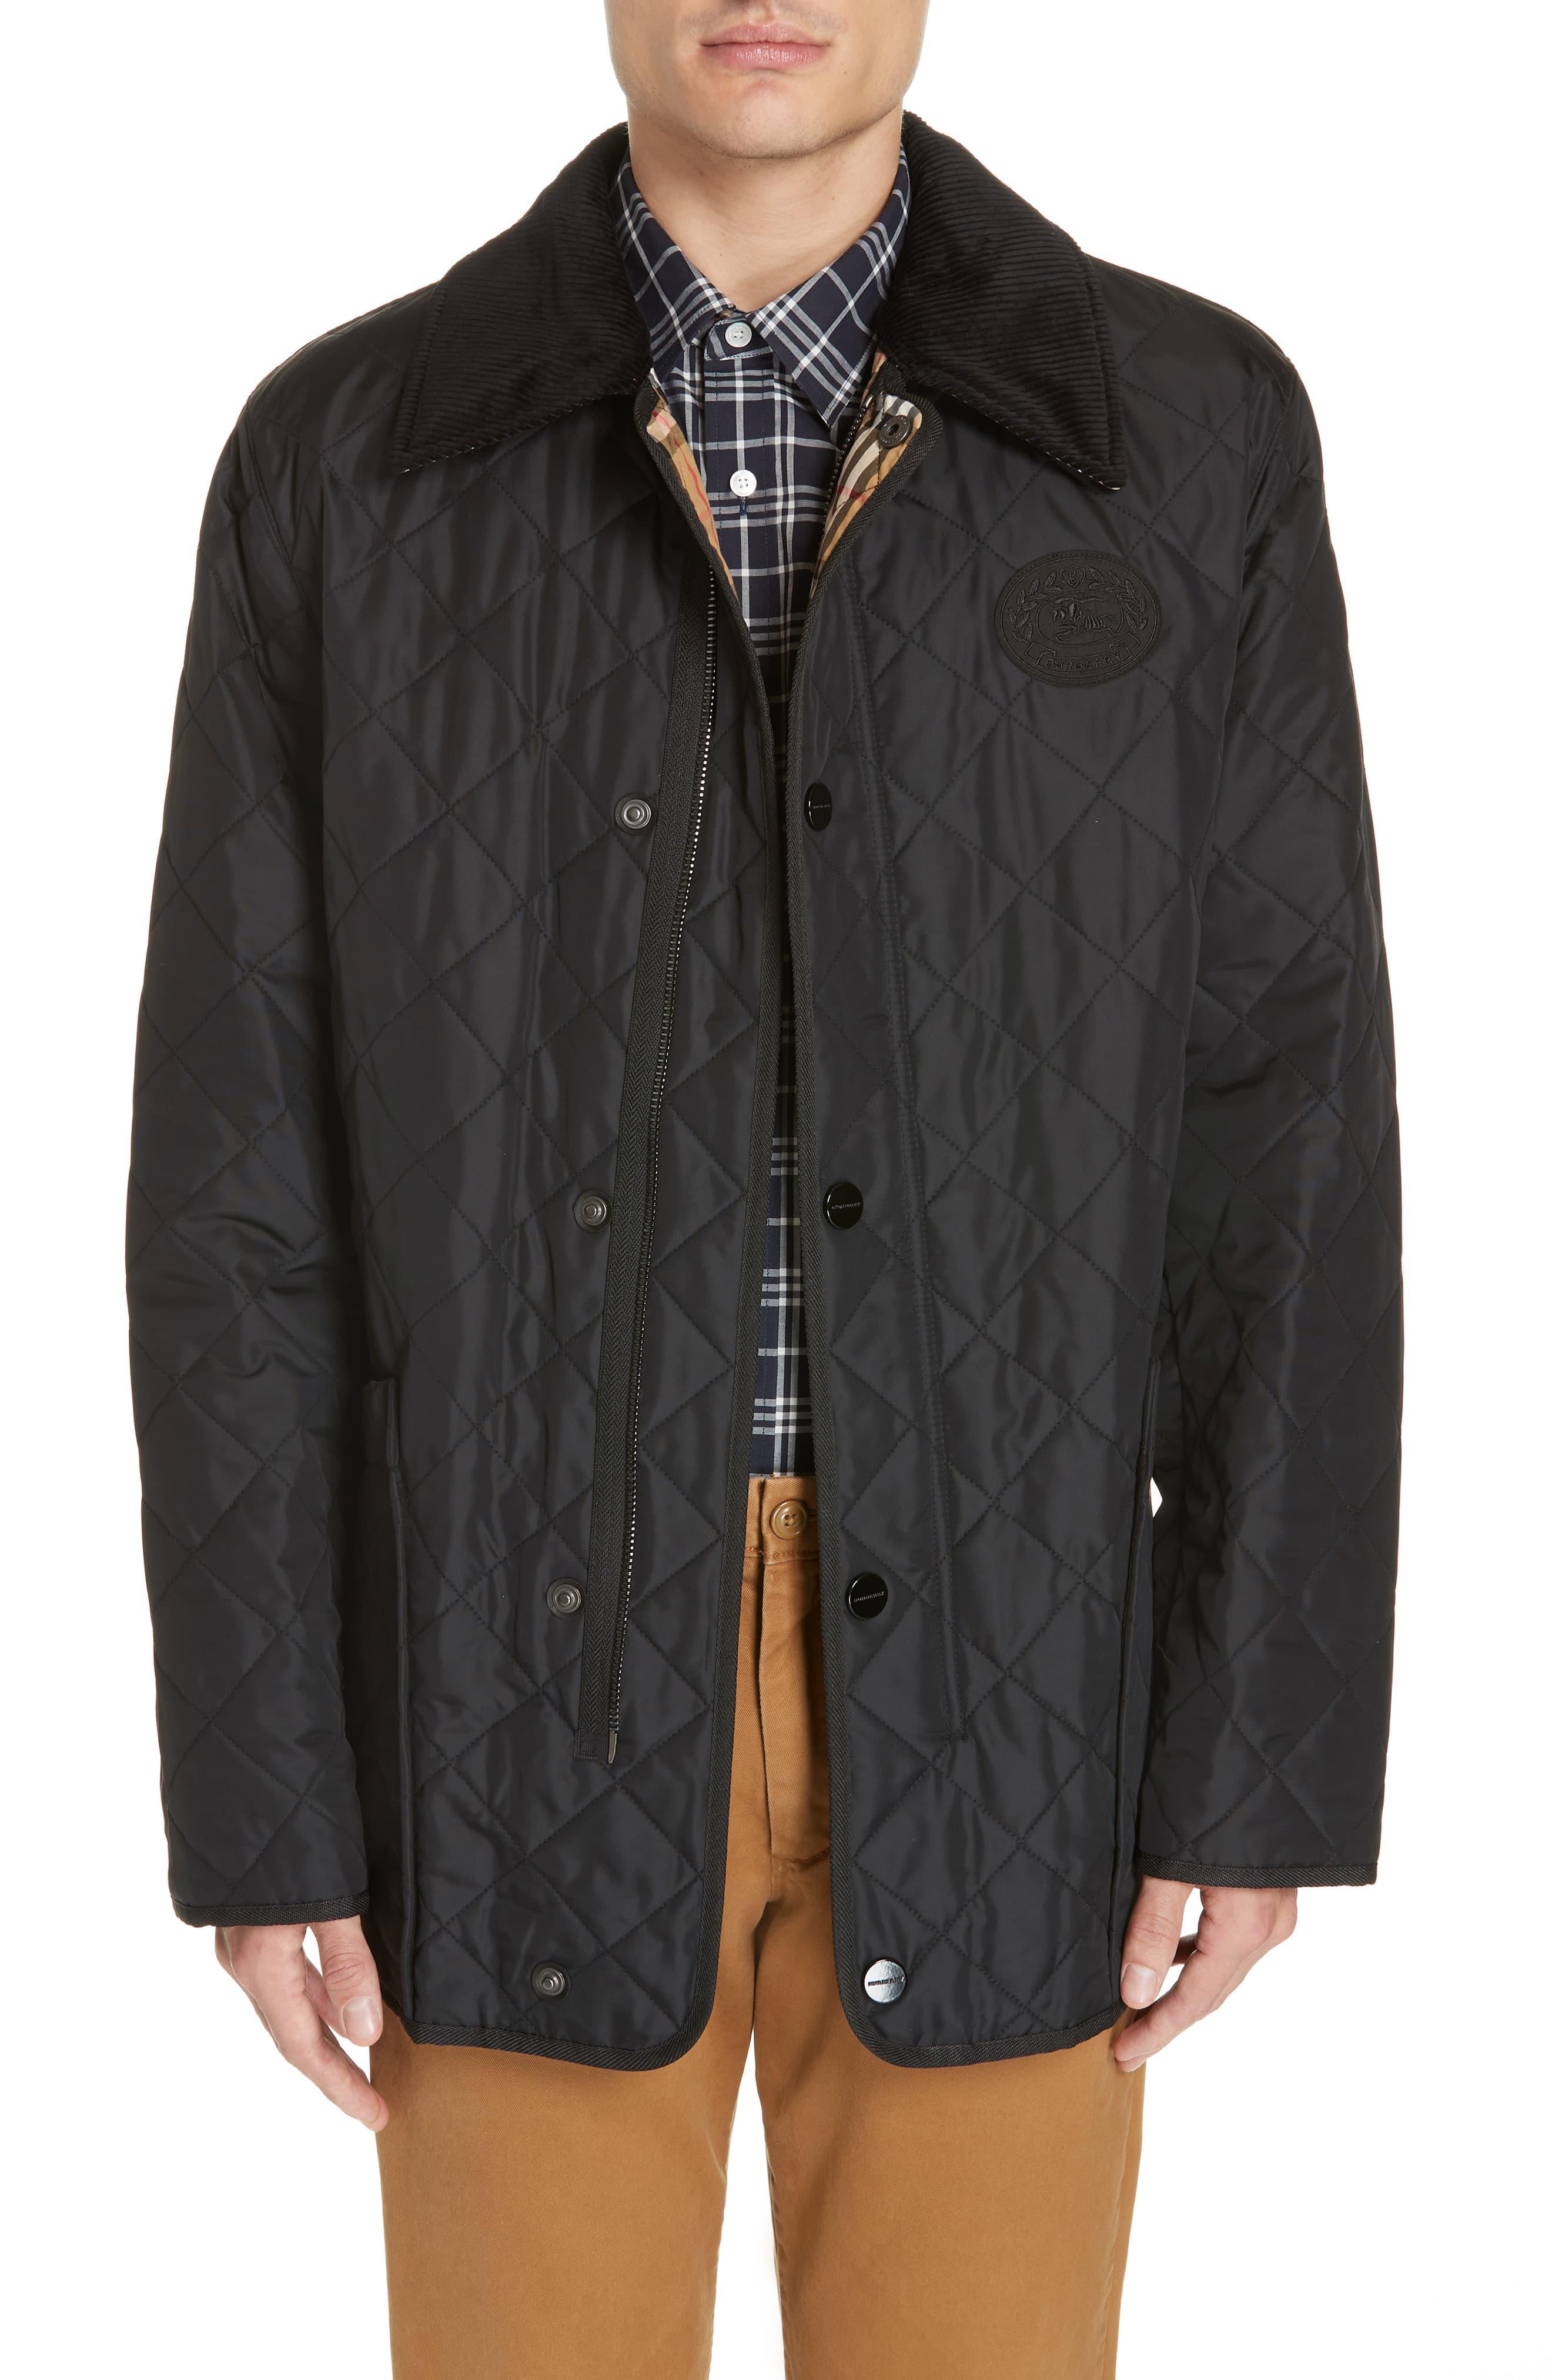 Burberry Corduroy Cotswold Quilted Jacket in Black for Men - Lyst